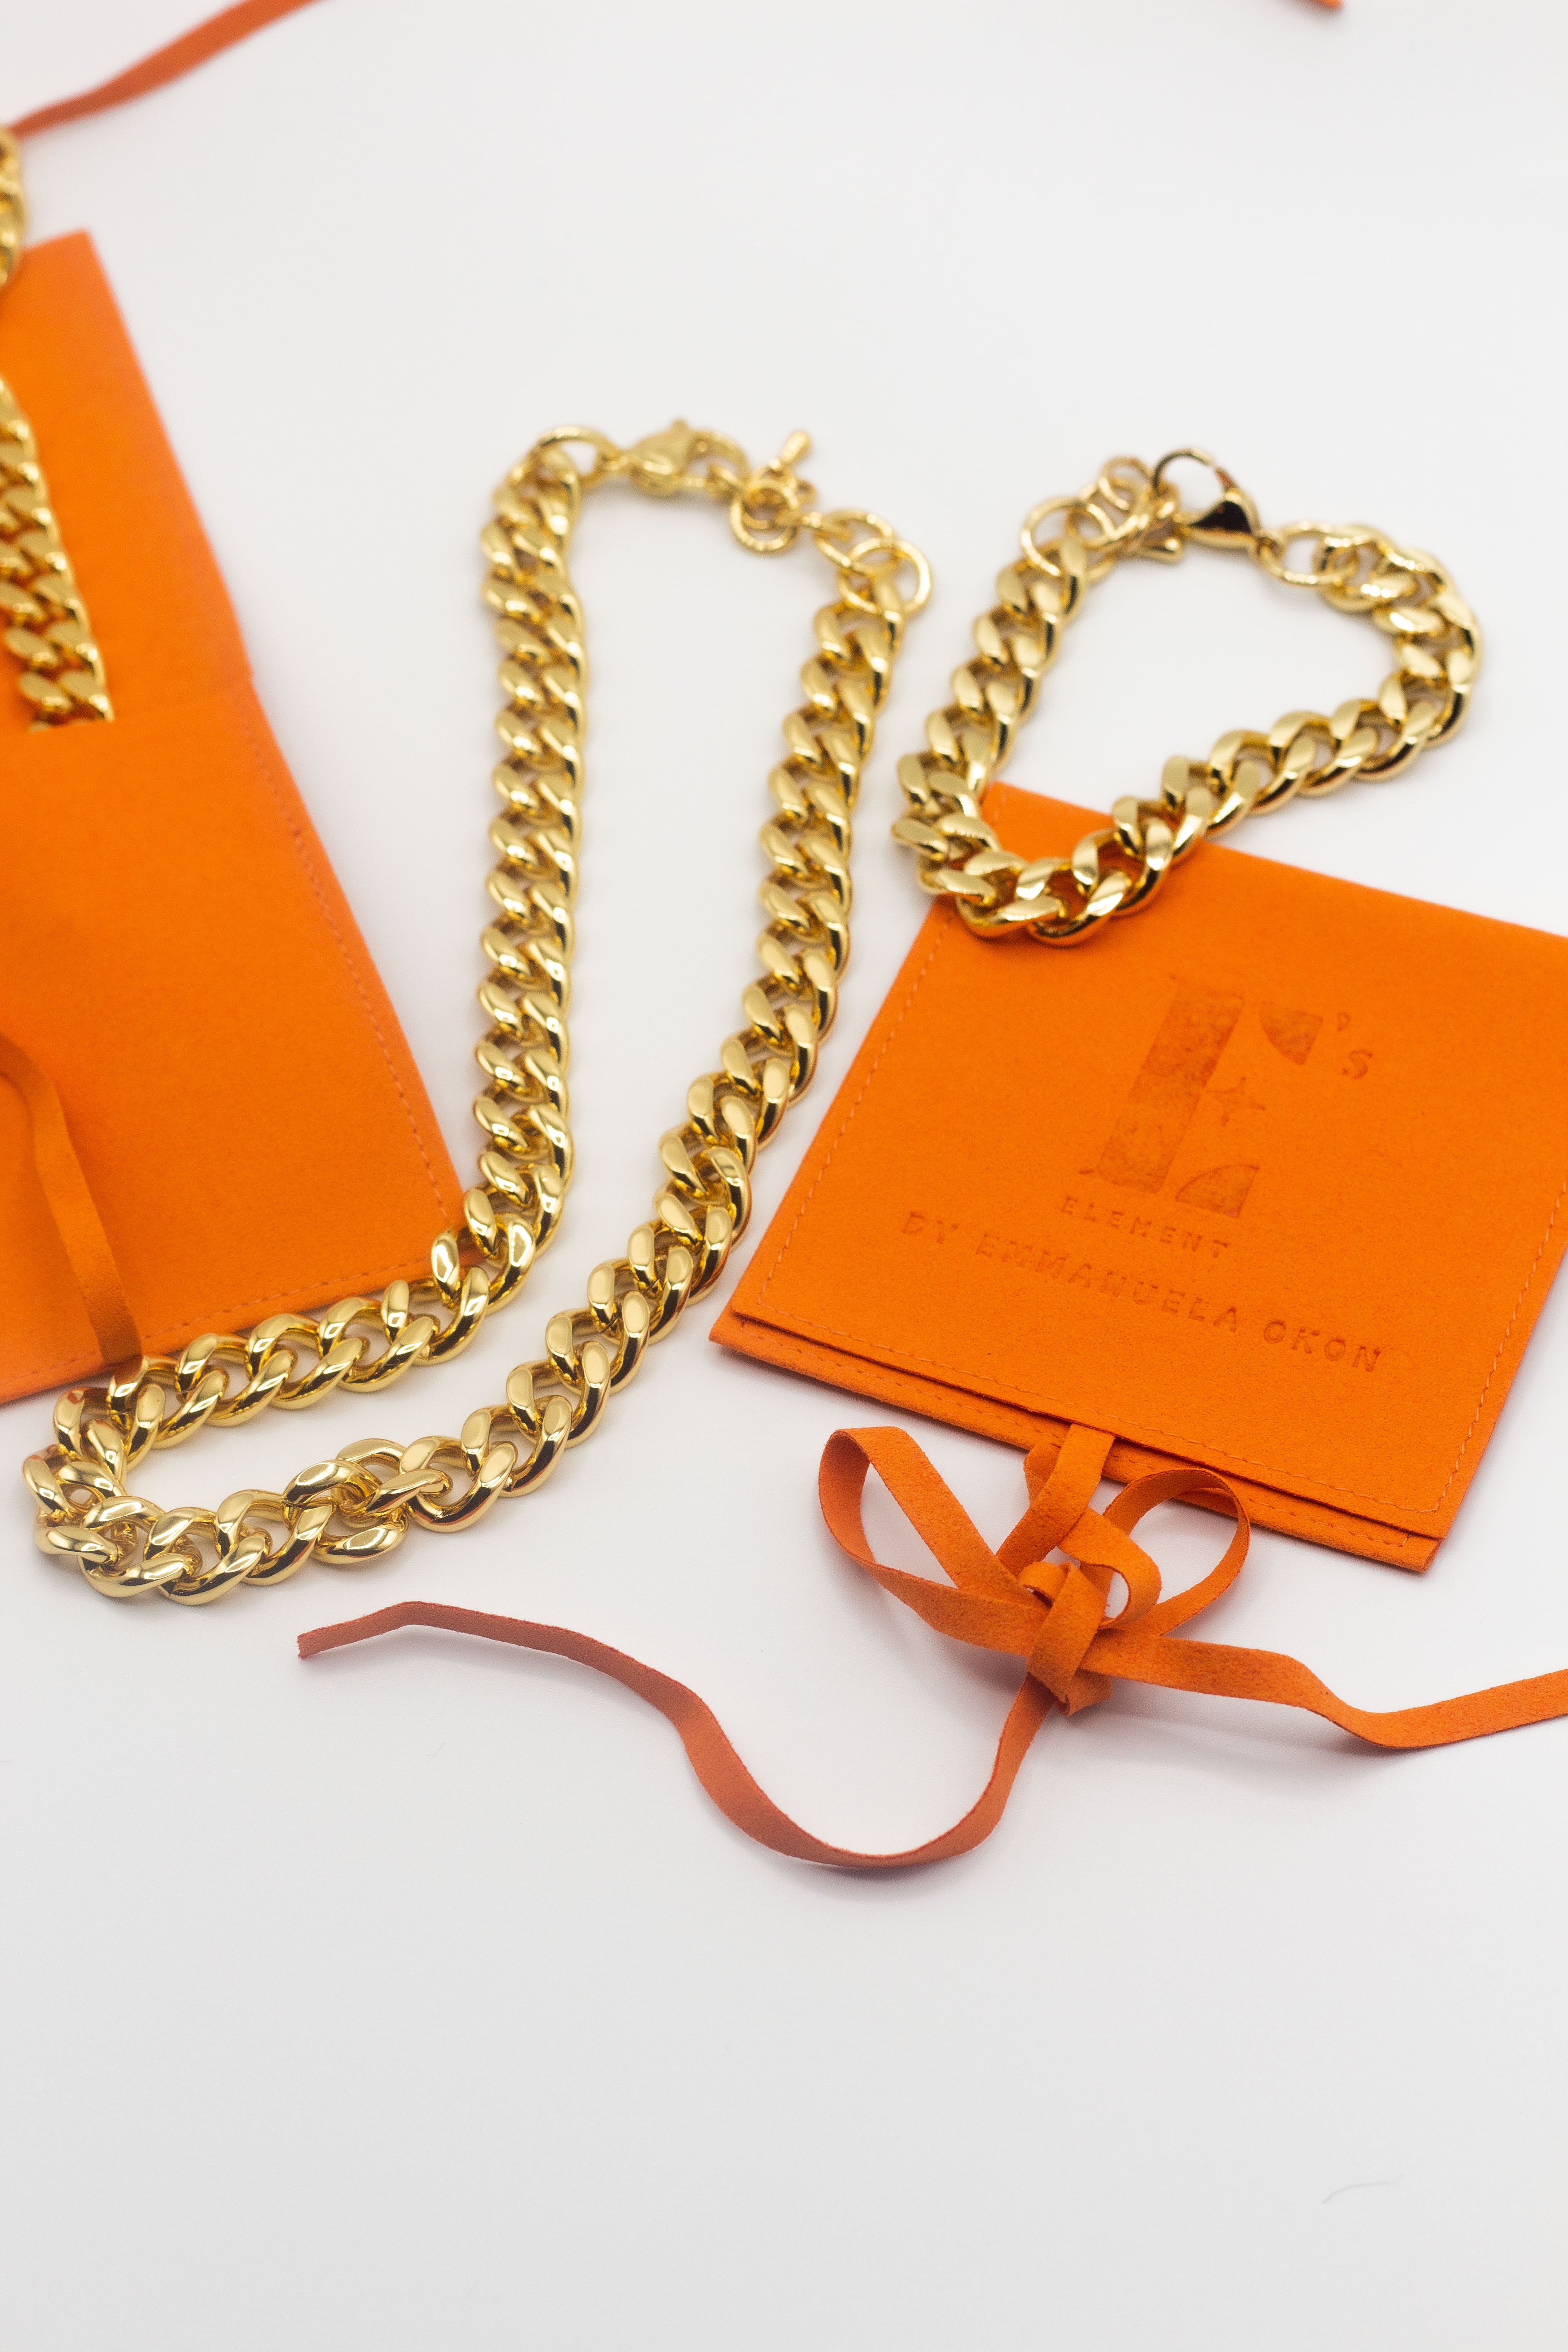 18k gold chain necklace in the middle. On the right is an 18k gold chain bracelet placed on an orange leather pouch. The Emmanuela Set in Gold by E's Element.